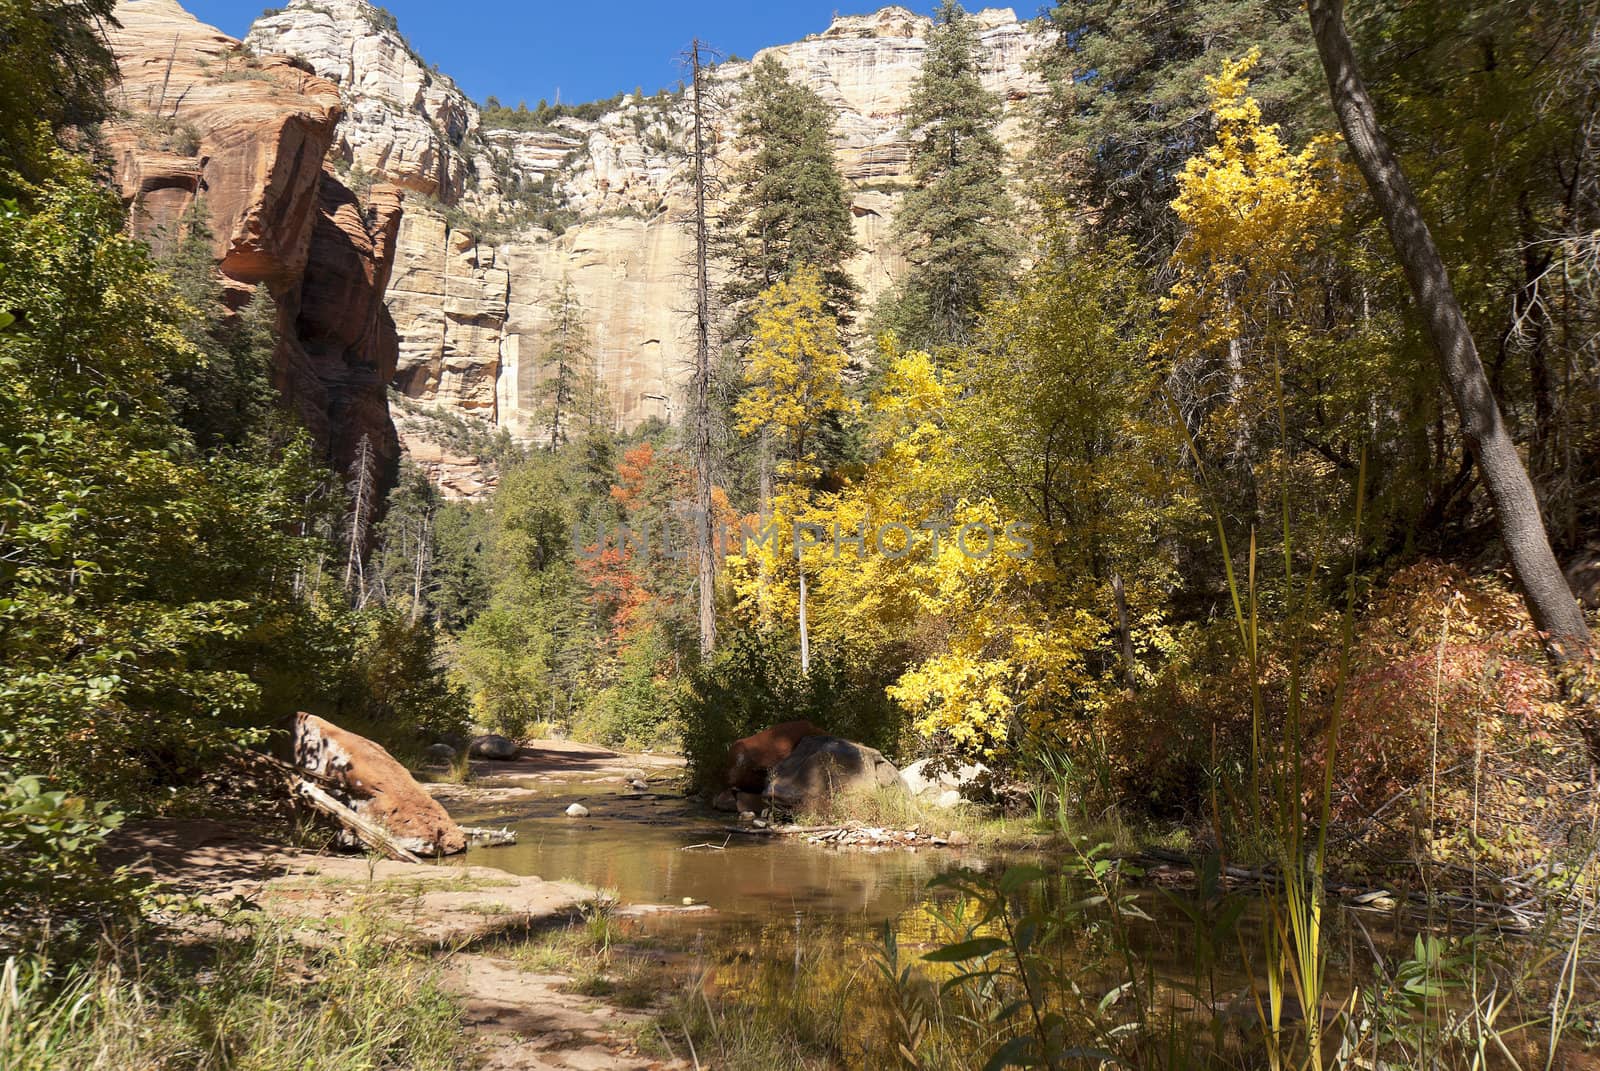 Oak Creek meanders through the canyon showing off fall colors ne by Claudine